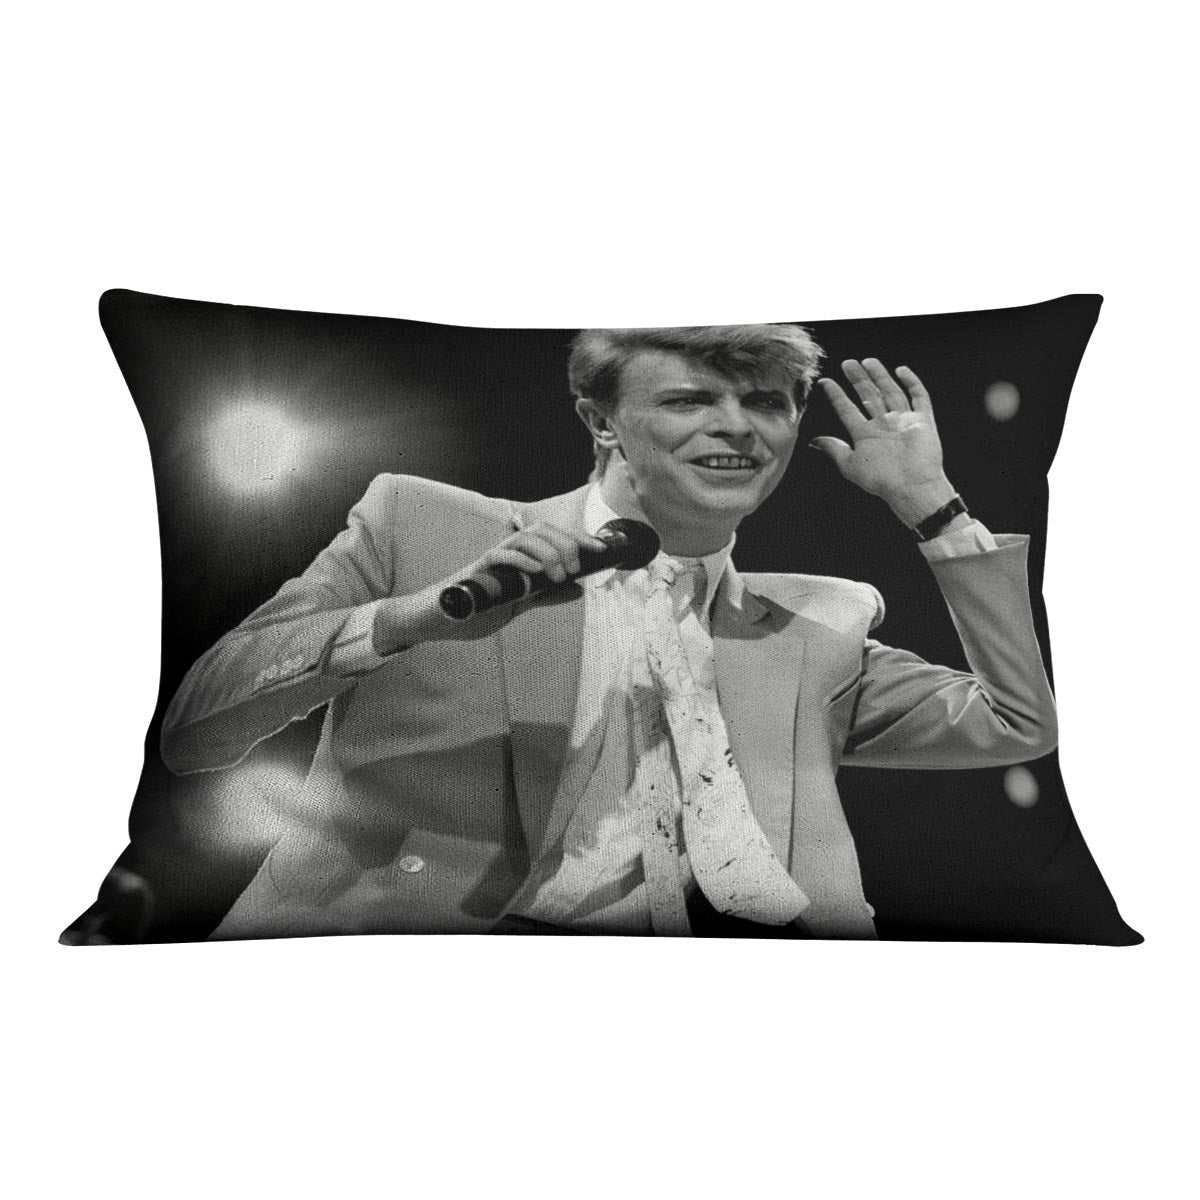 David Bowie in concert Cushion